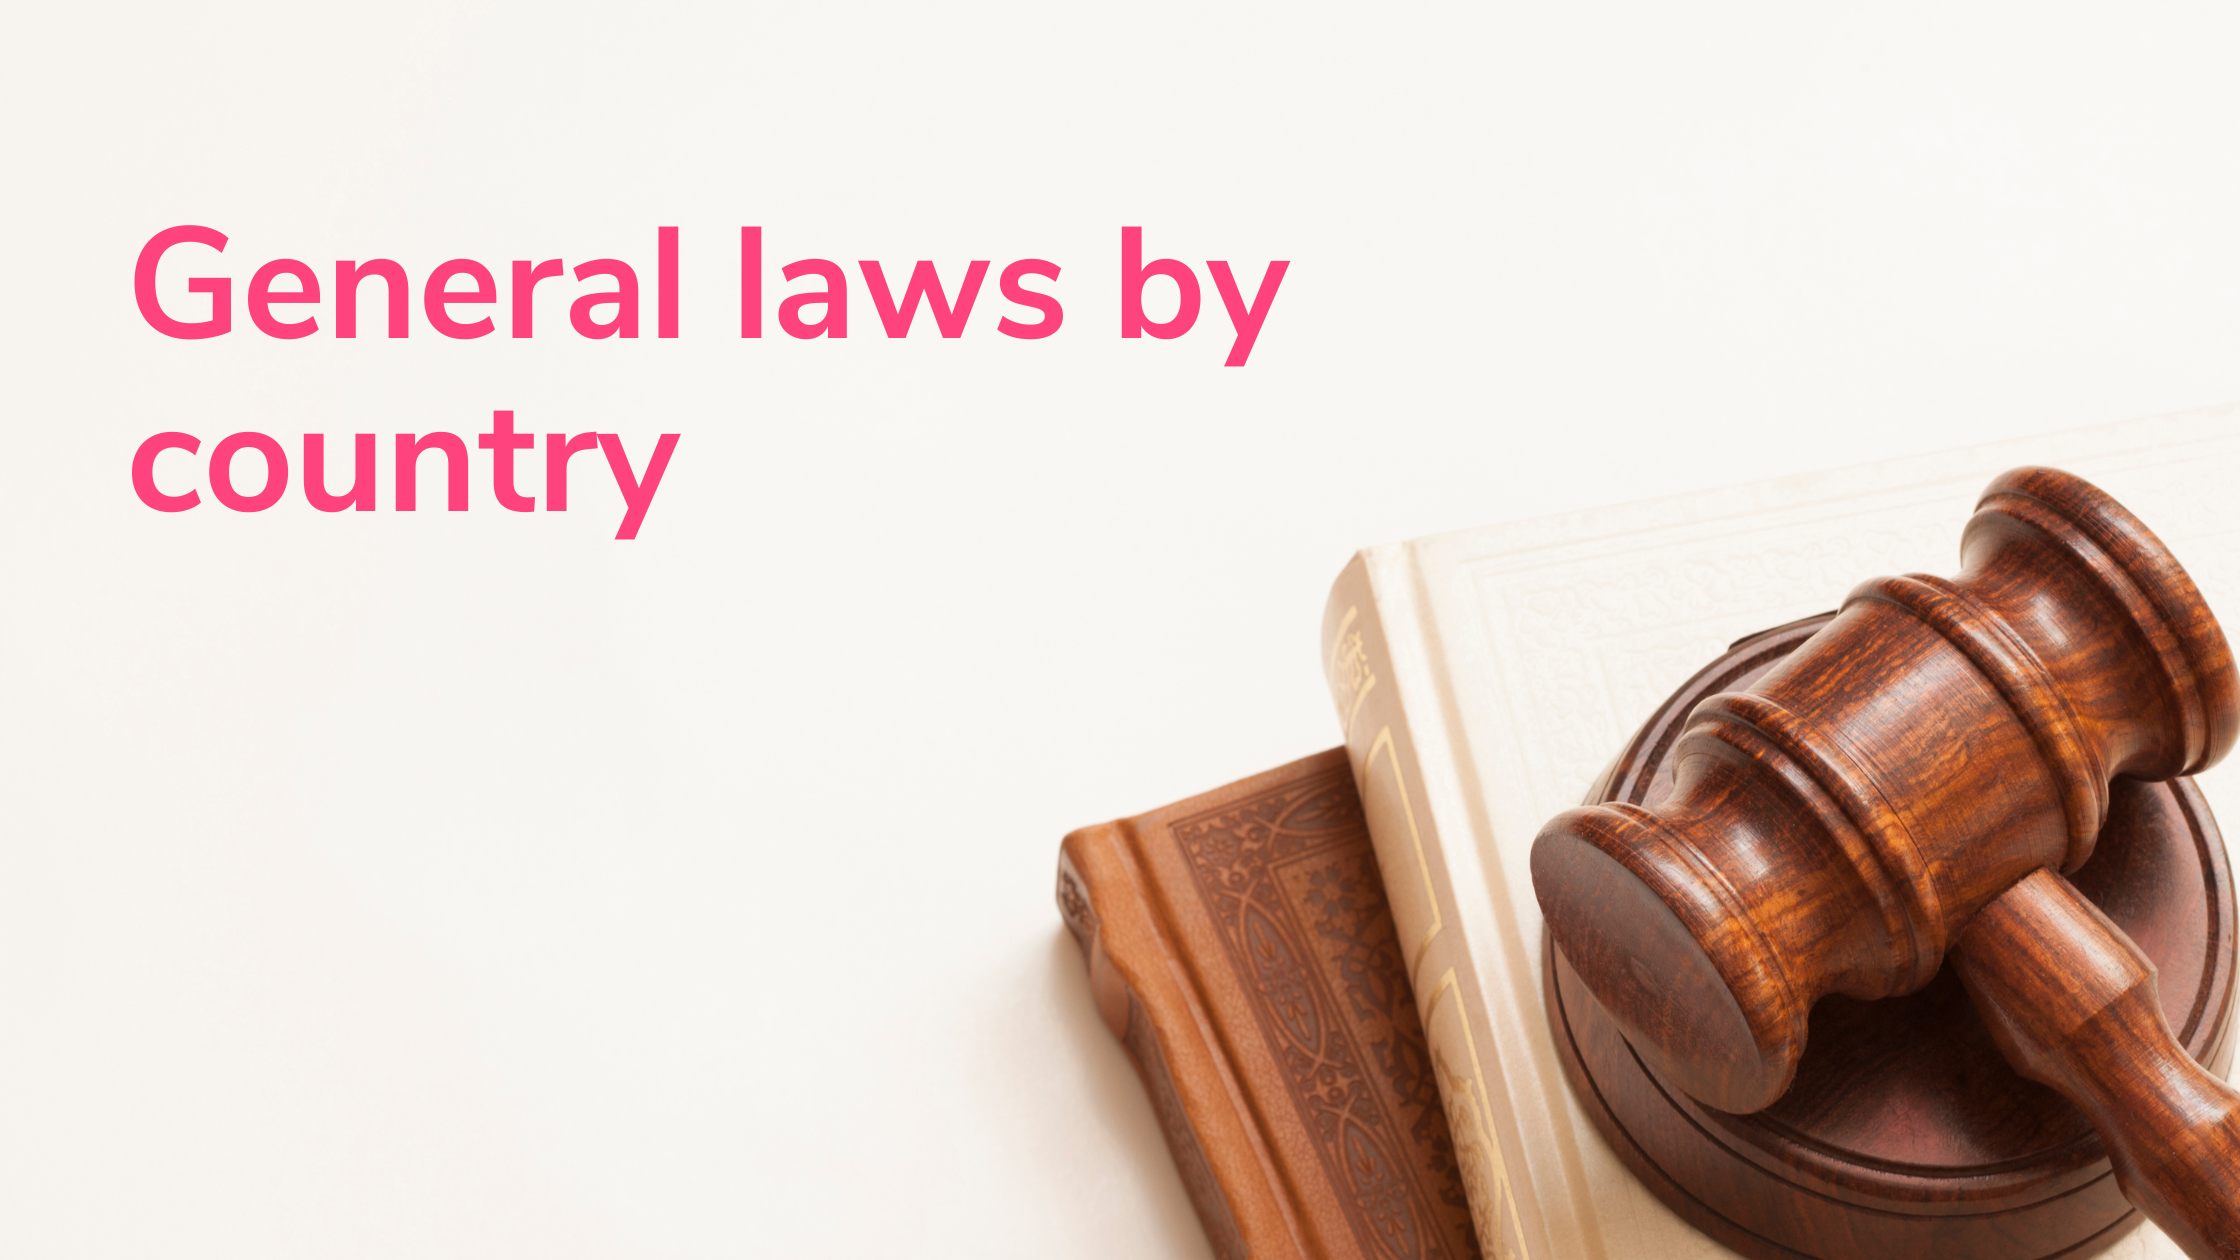 General laws by country